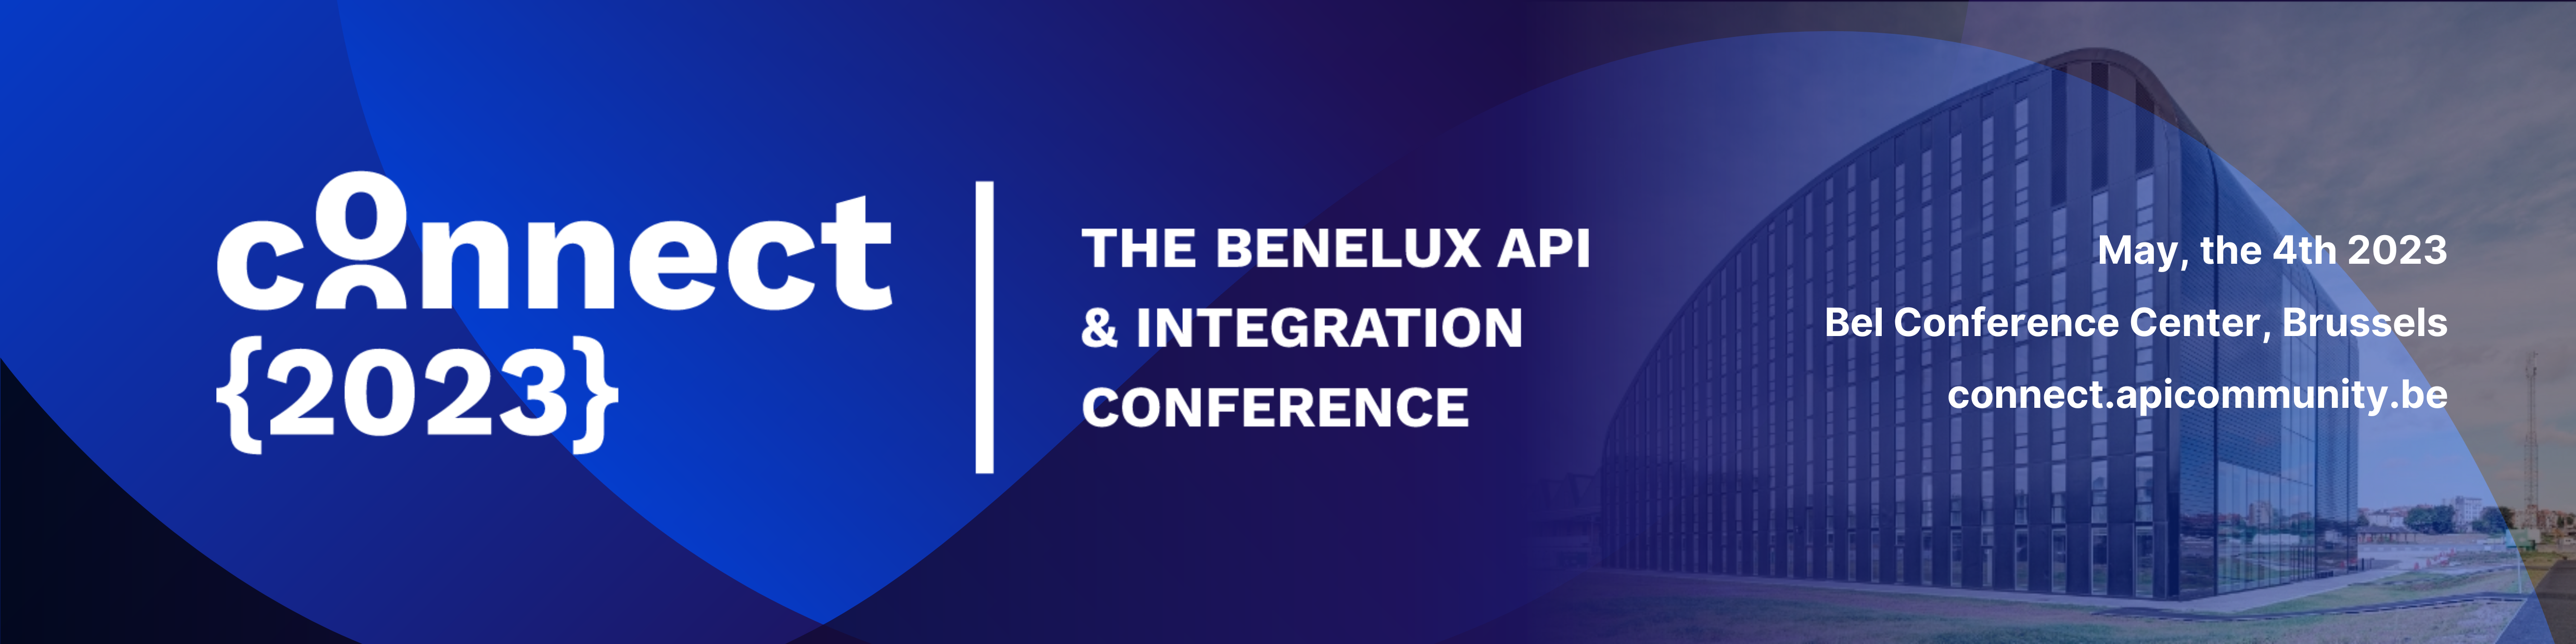 Connect 2023 - API & Integration Conference